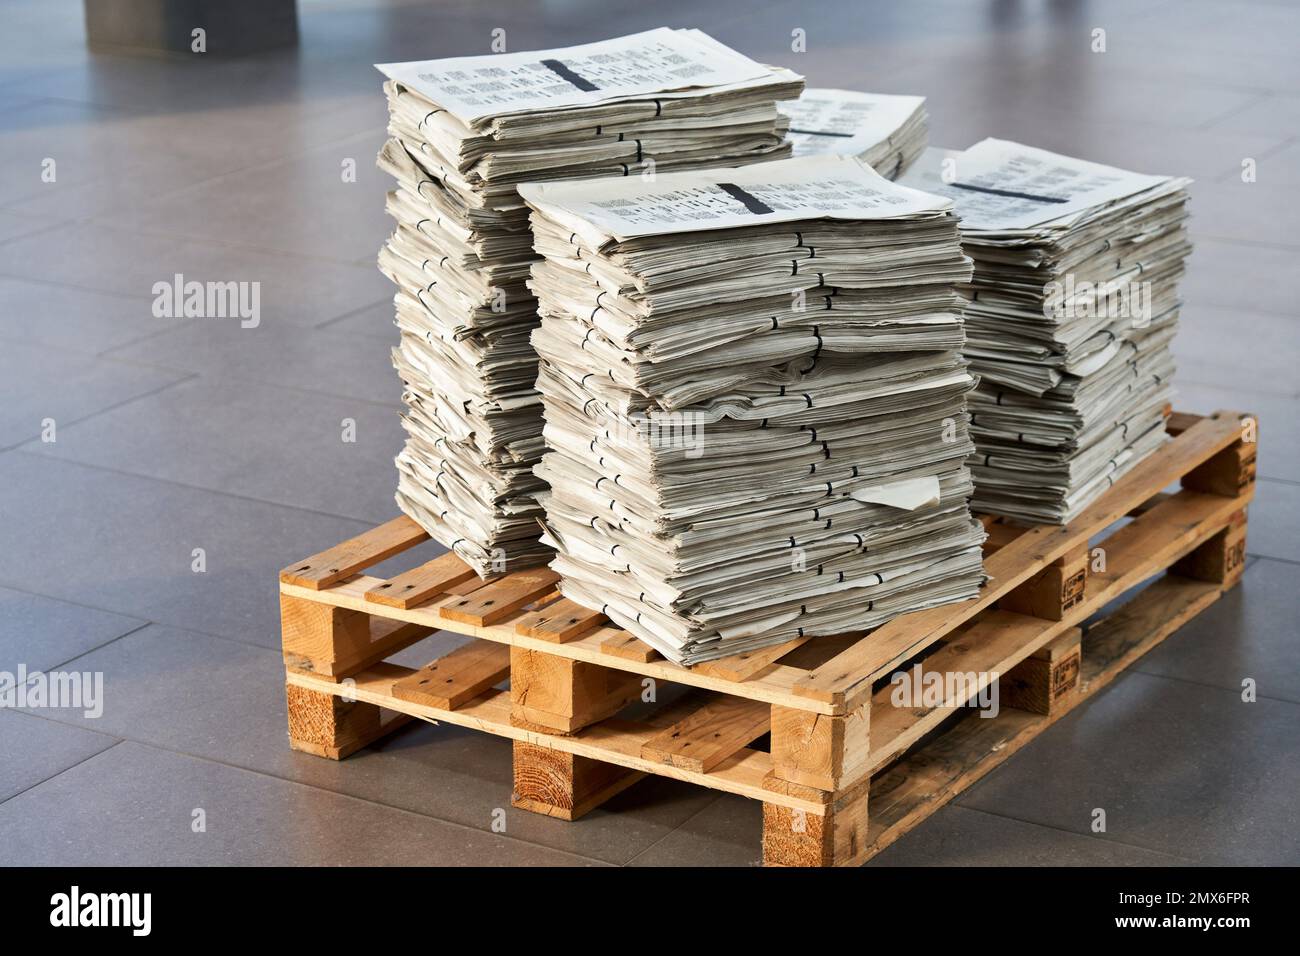 Newspapers in a pallet would generally be grouped and shrink-wrapped together for secure transportation. Depending on the volume of newspapers, the Stock Photo